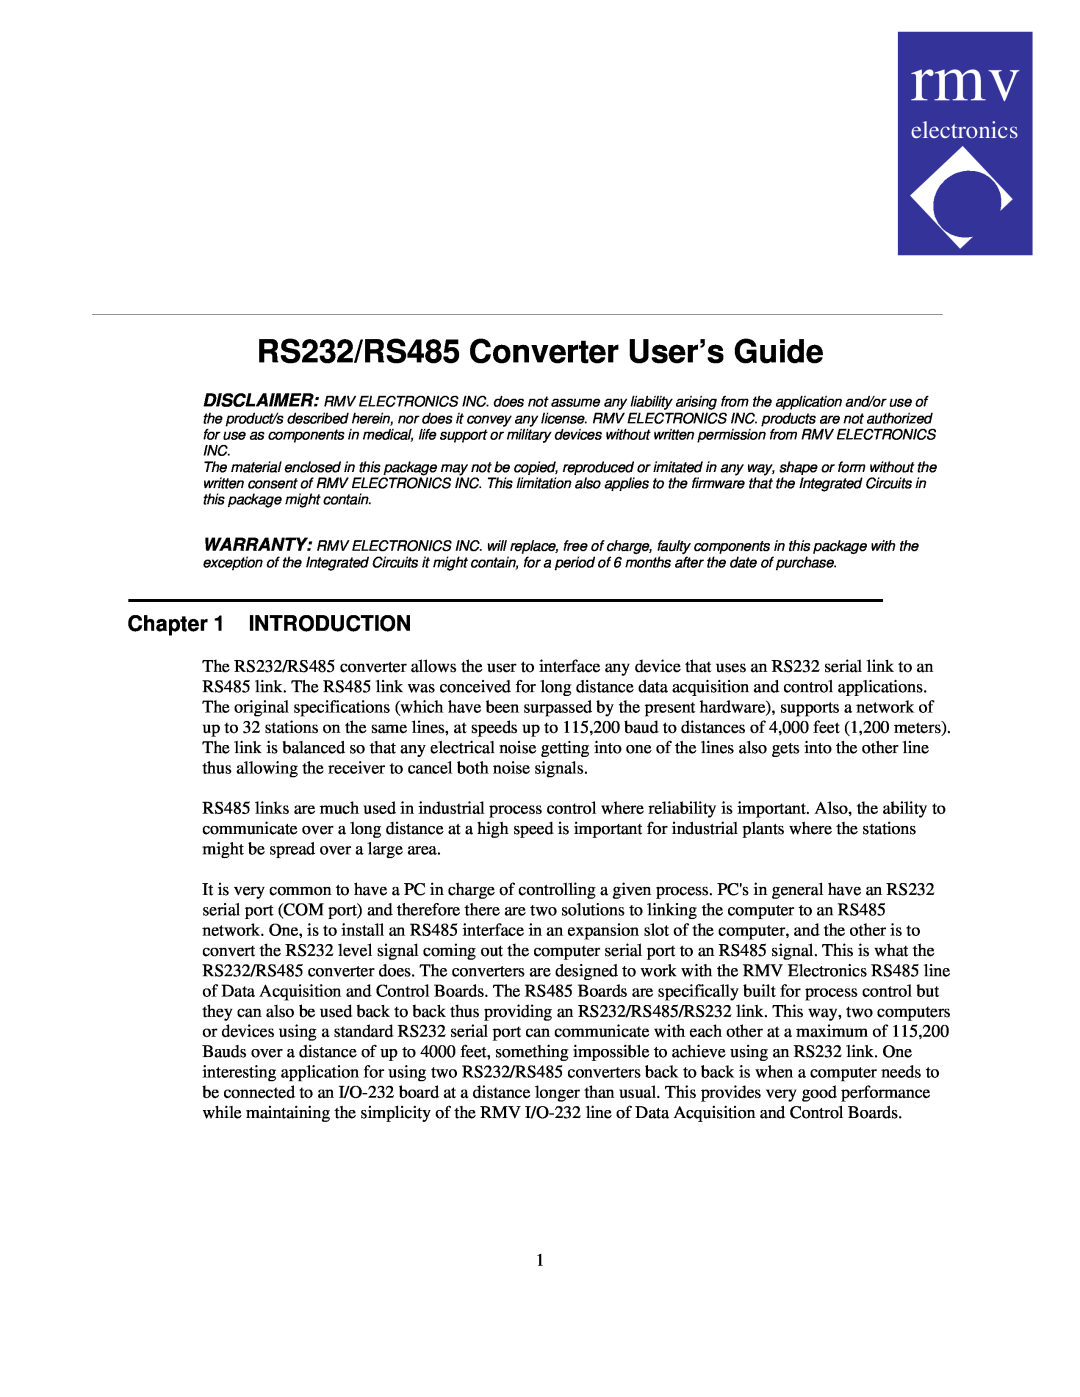 Procom warranty Introduction, RS232/RS485 Converter User’s Guide, electronics 